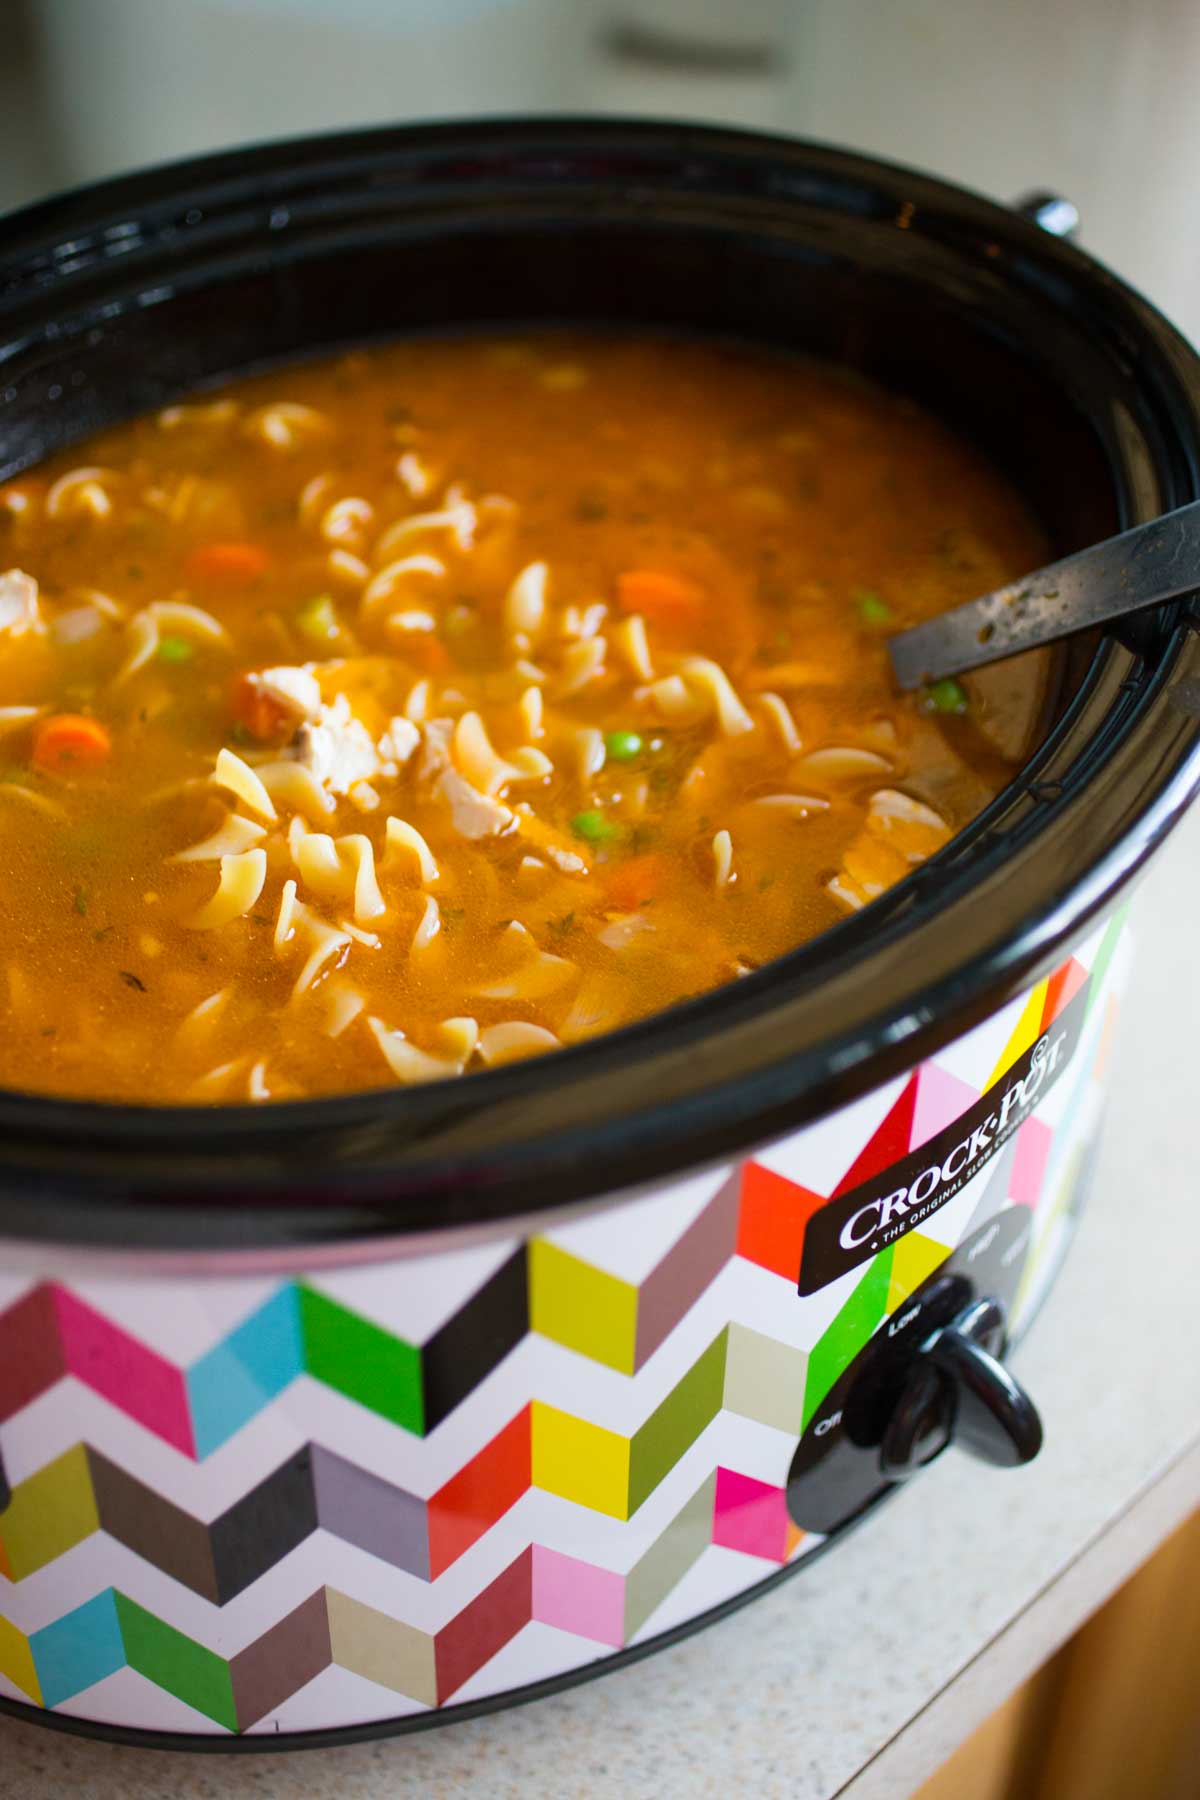 A colorful Crockpot is filled with a tomato-based chicken soup with pasta.